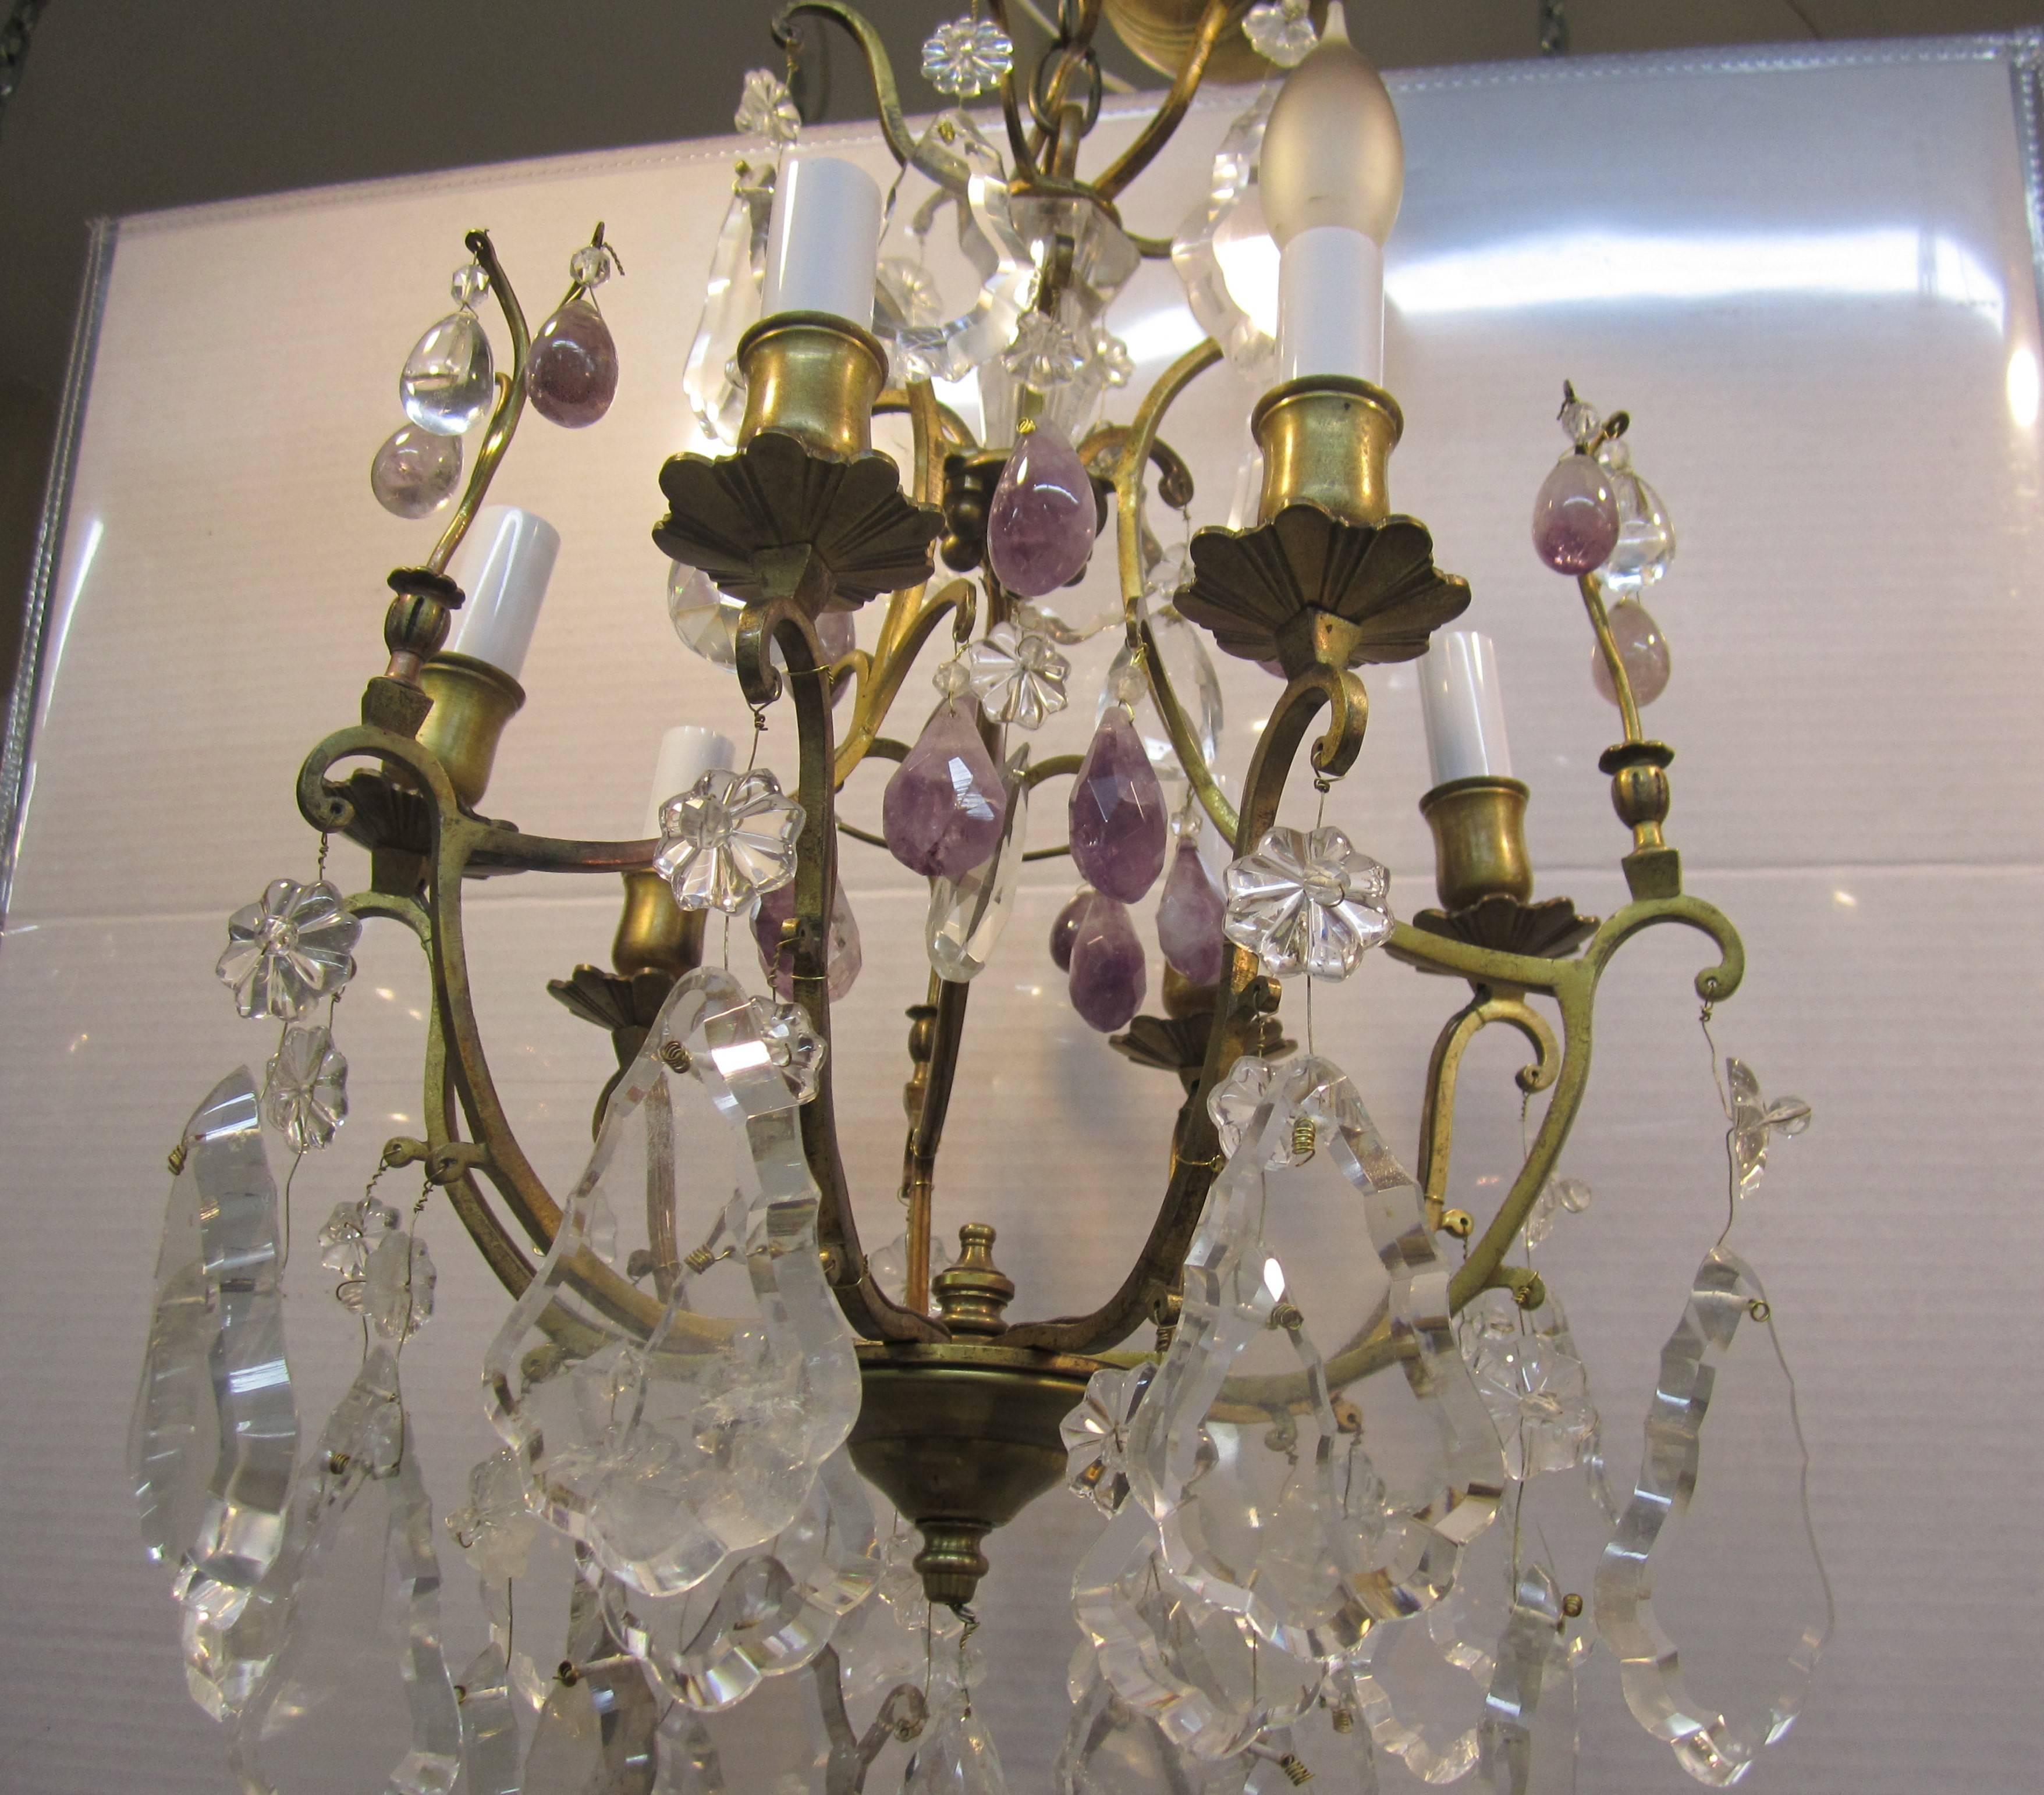 A beautiful six-arm (light) gold gilt bronze chandelier with clear crystals and honed purple amethyst crystals. Largest crystal is 6